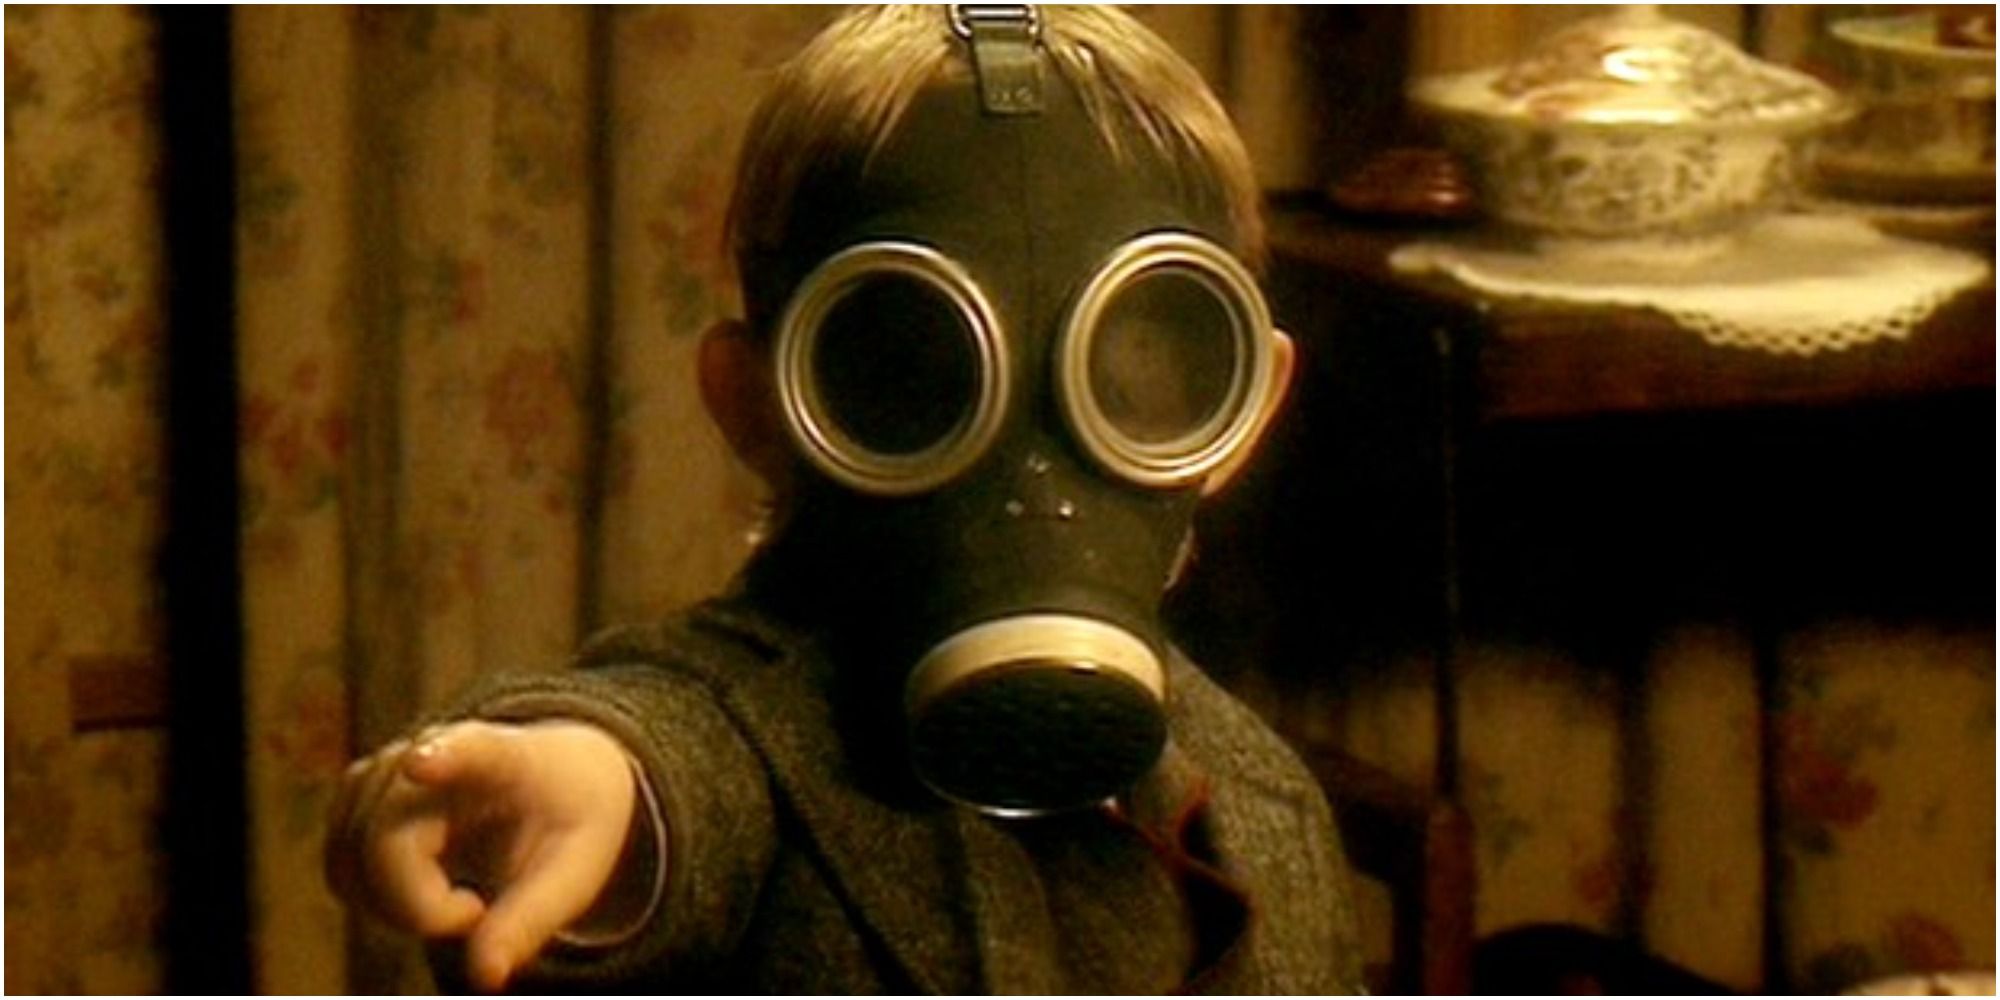 A small child in a gas mask points at the camera in Doctor Who.